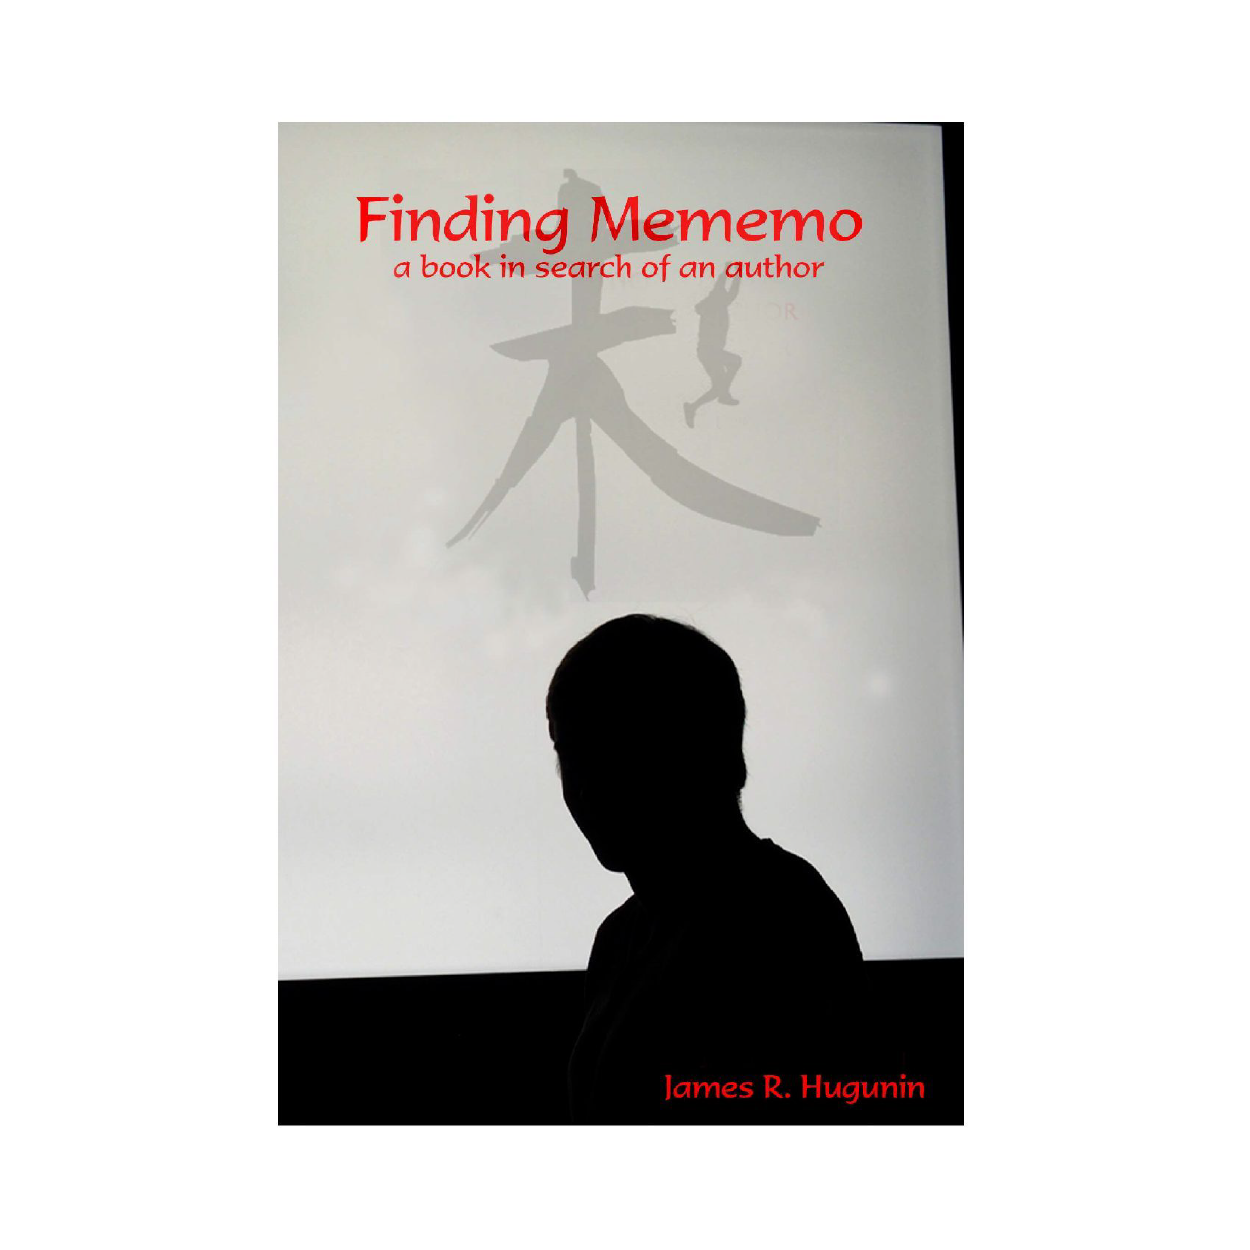 Finding Mememo: A Book in Search of an Author by James R. Hugunin